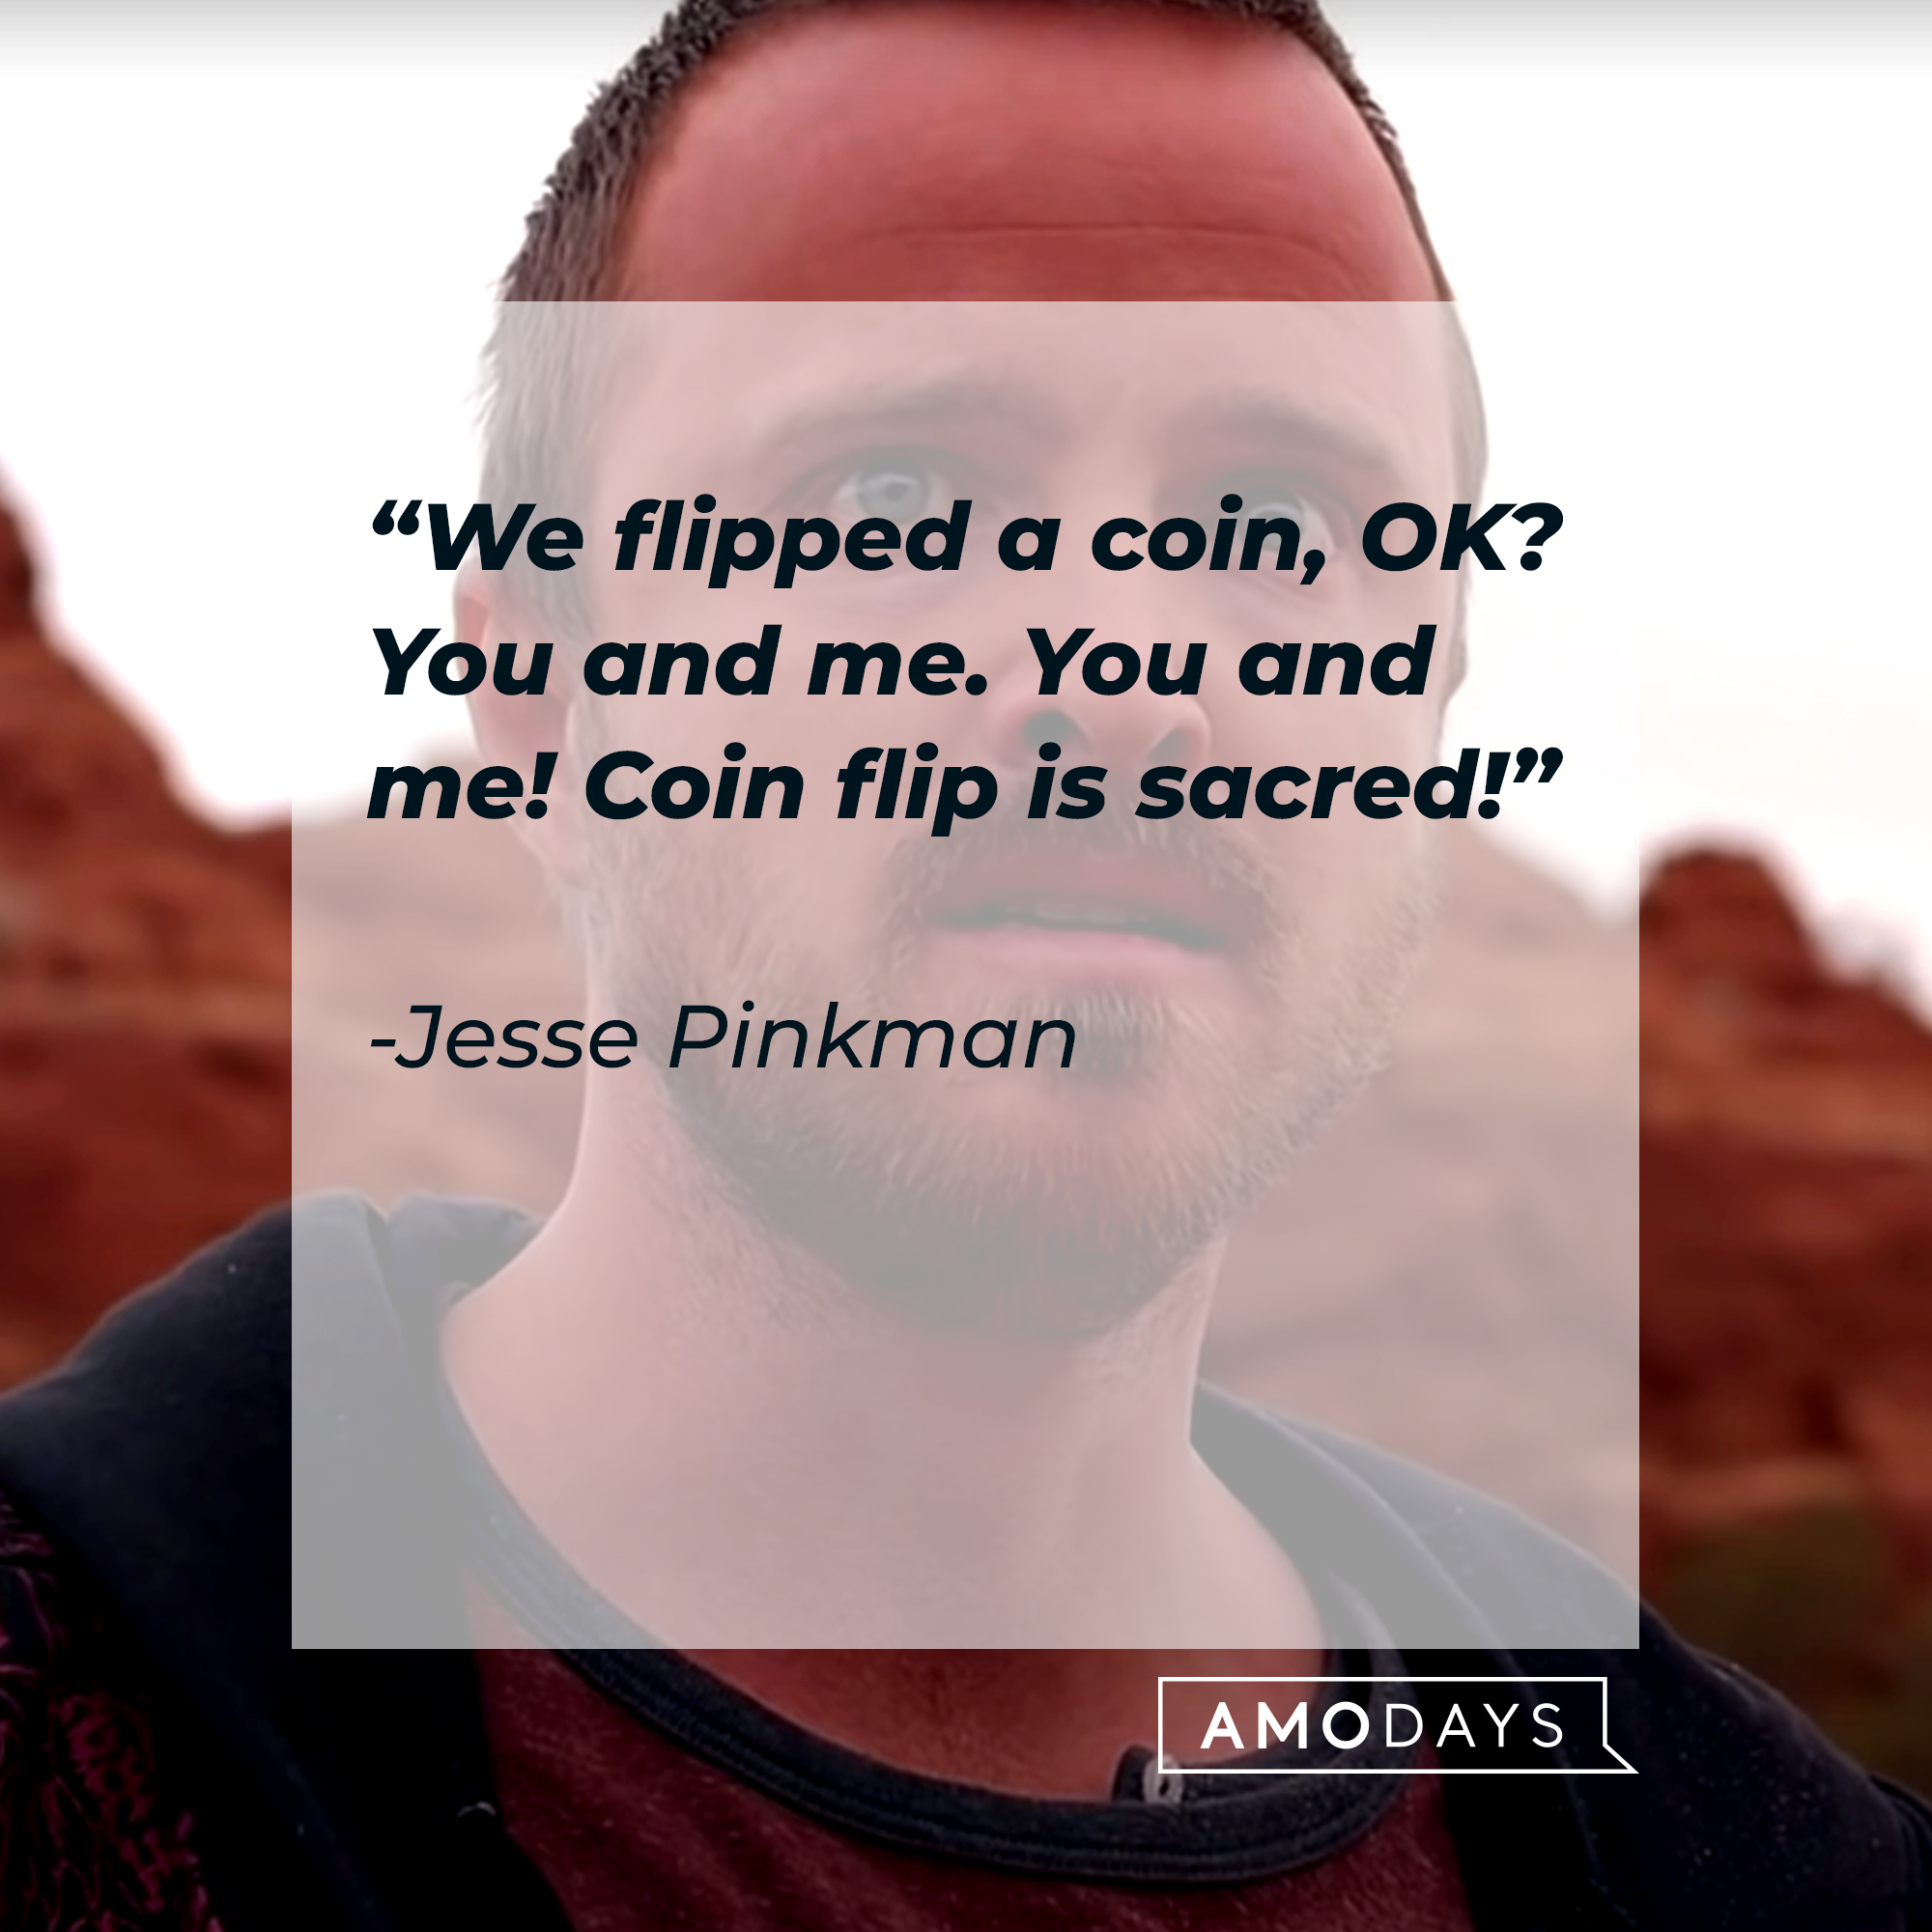 An image of Jesse Pinkman, with his quote: “We flipped a coin, OK? You and me. You and me! Coin flip is sacred!” | Source: Youtube.com/breakingbad